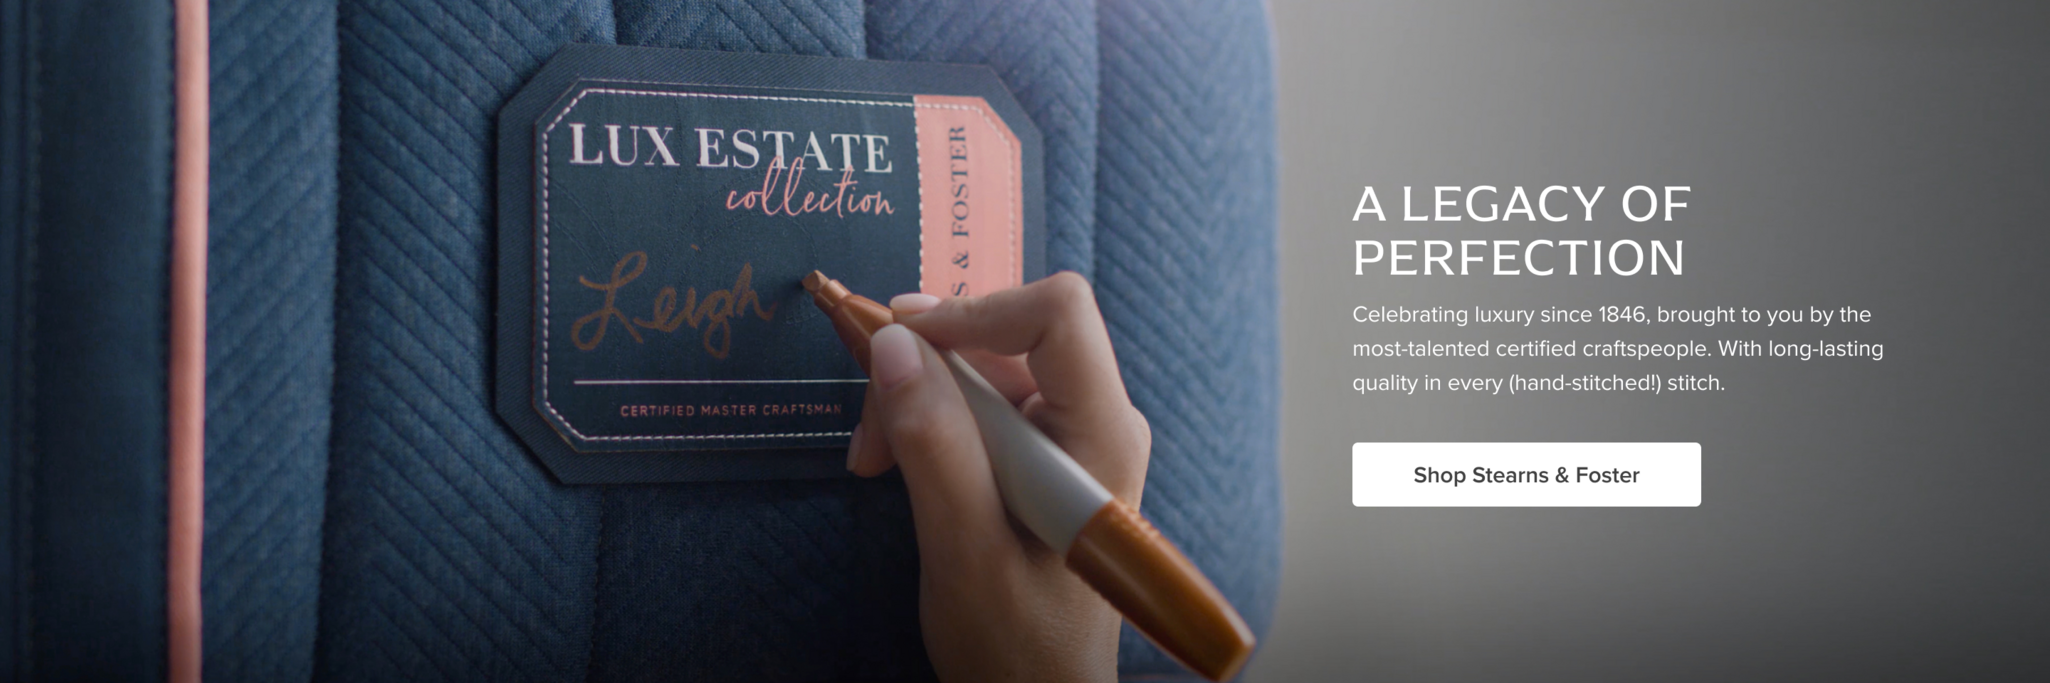 A Legacy of Perfection. Celebrating luxury since 1846, brought to you by the most-talented certified craftspeople. With long-lasting quality in every (hand-stitched!) stitch. Shop Stearns & Foster 